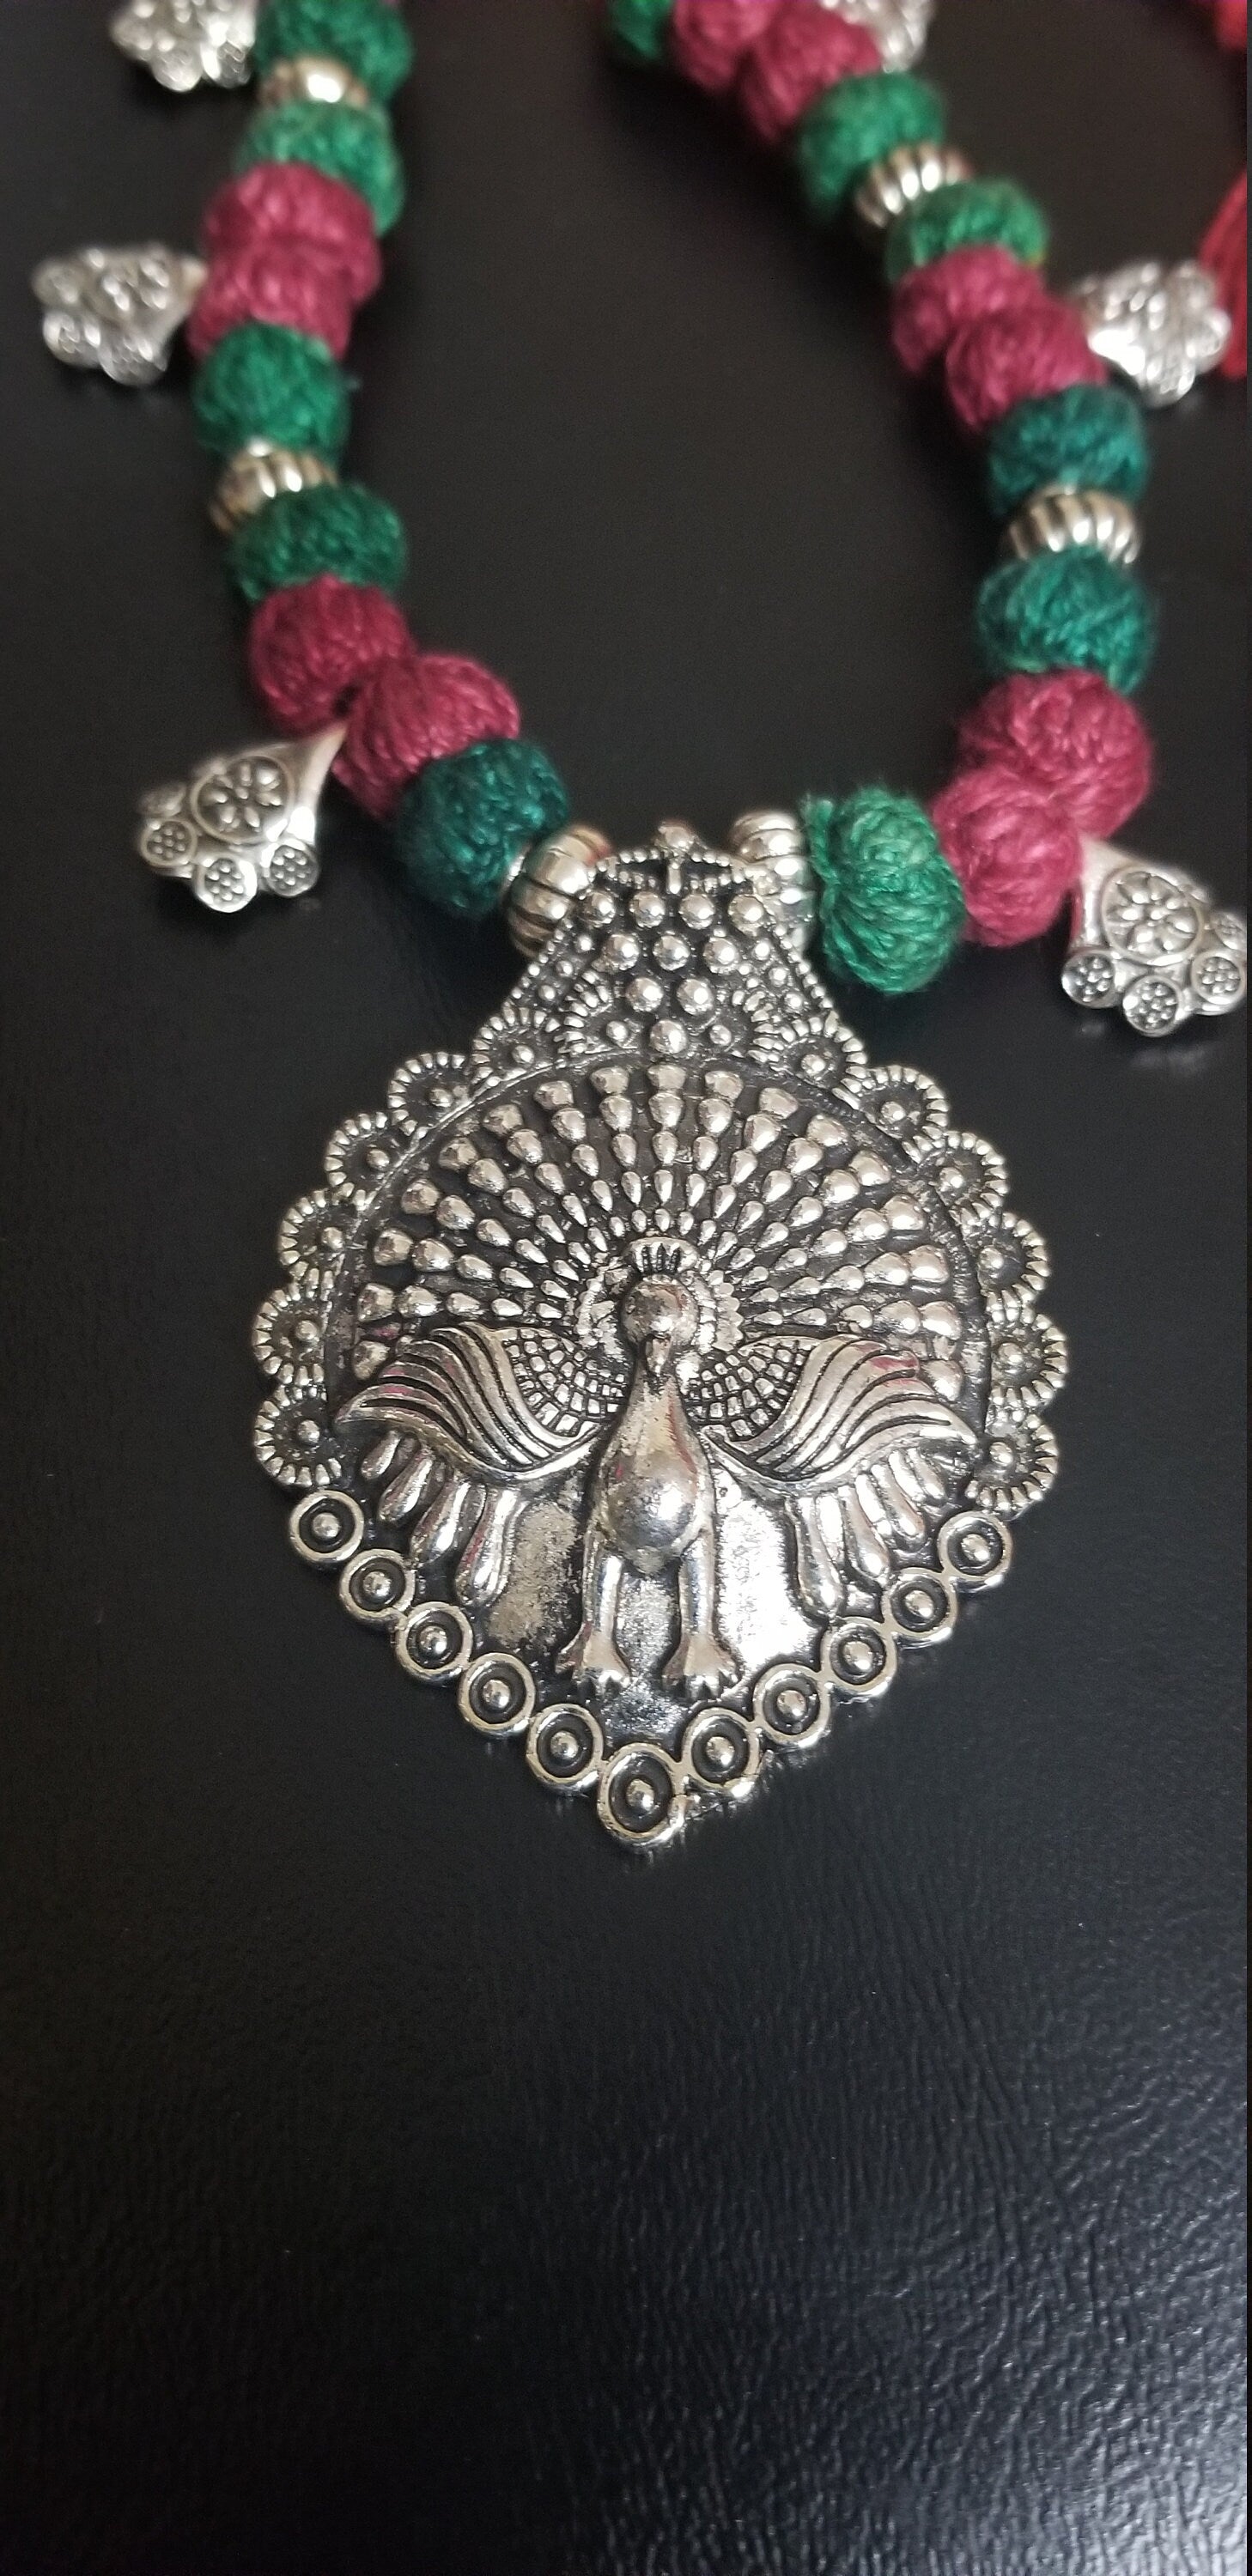 German silver pendant with green Maroon beads chain with matching jhumkis